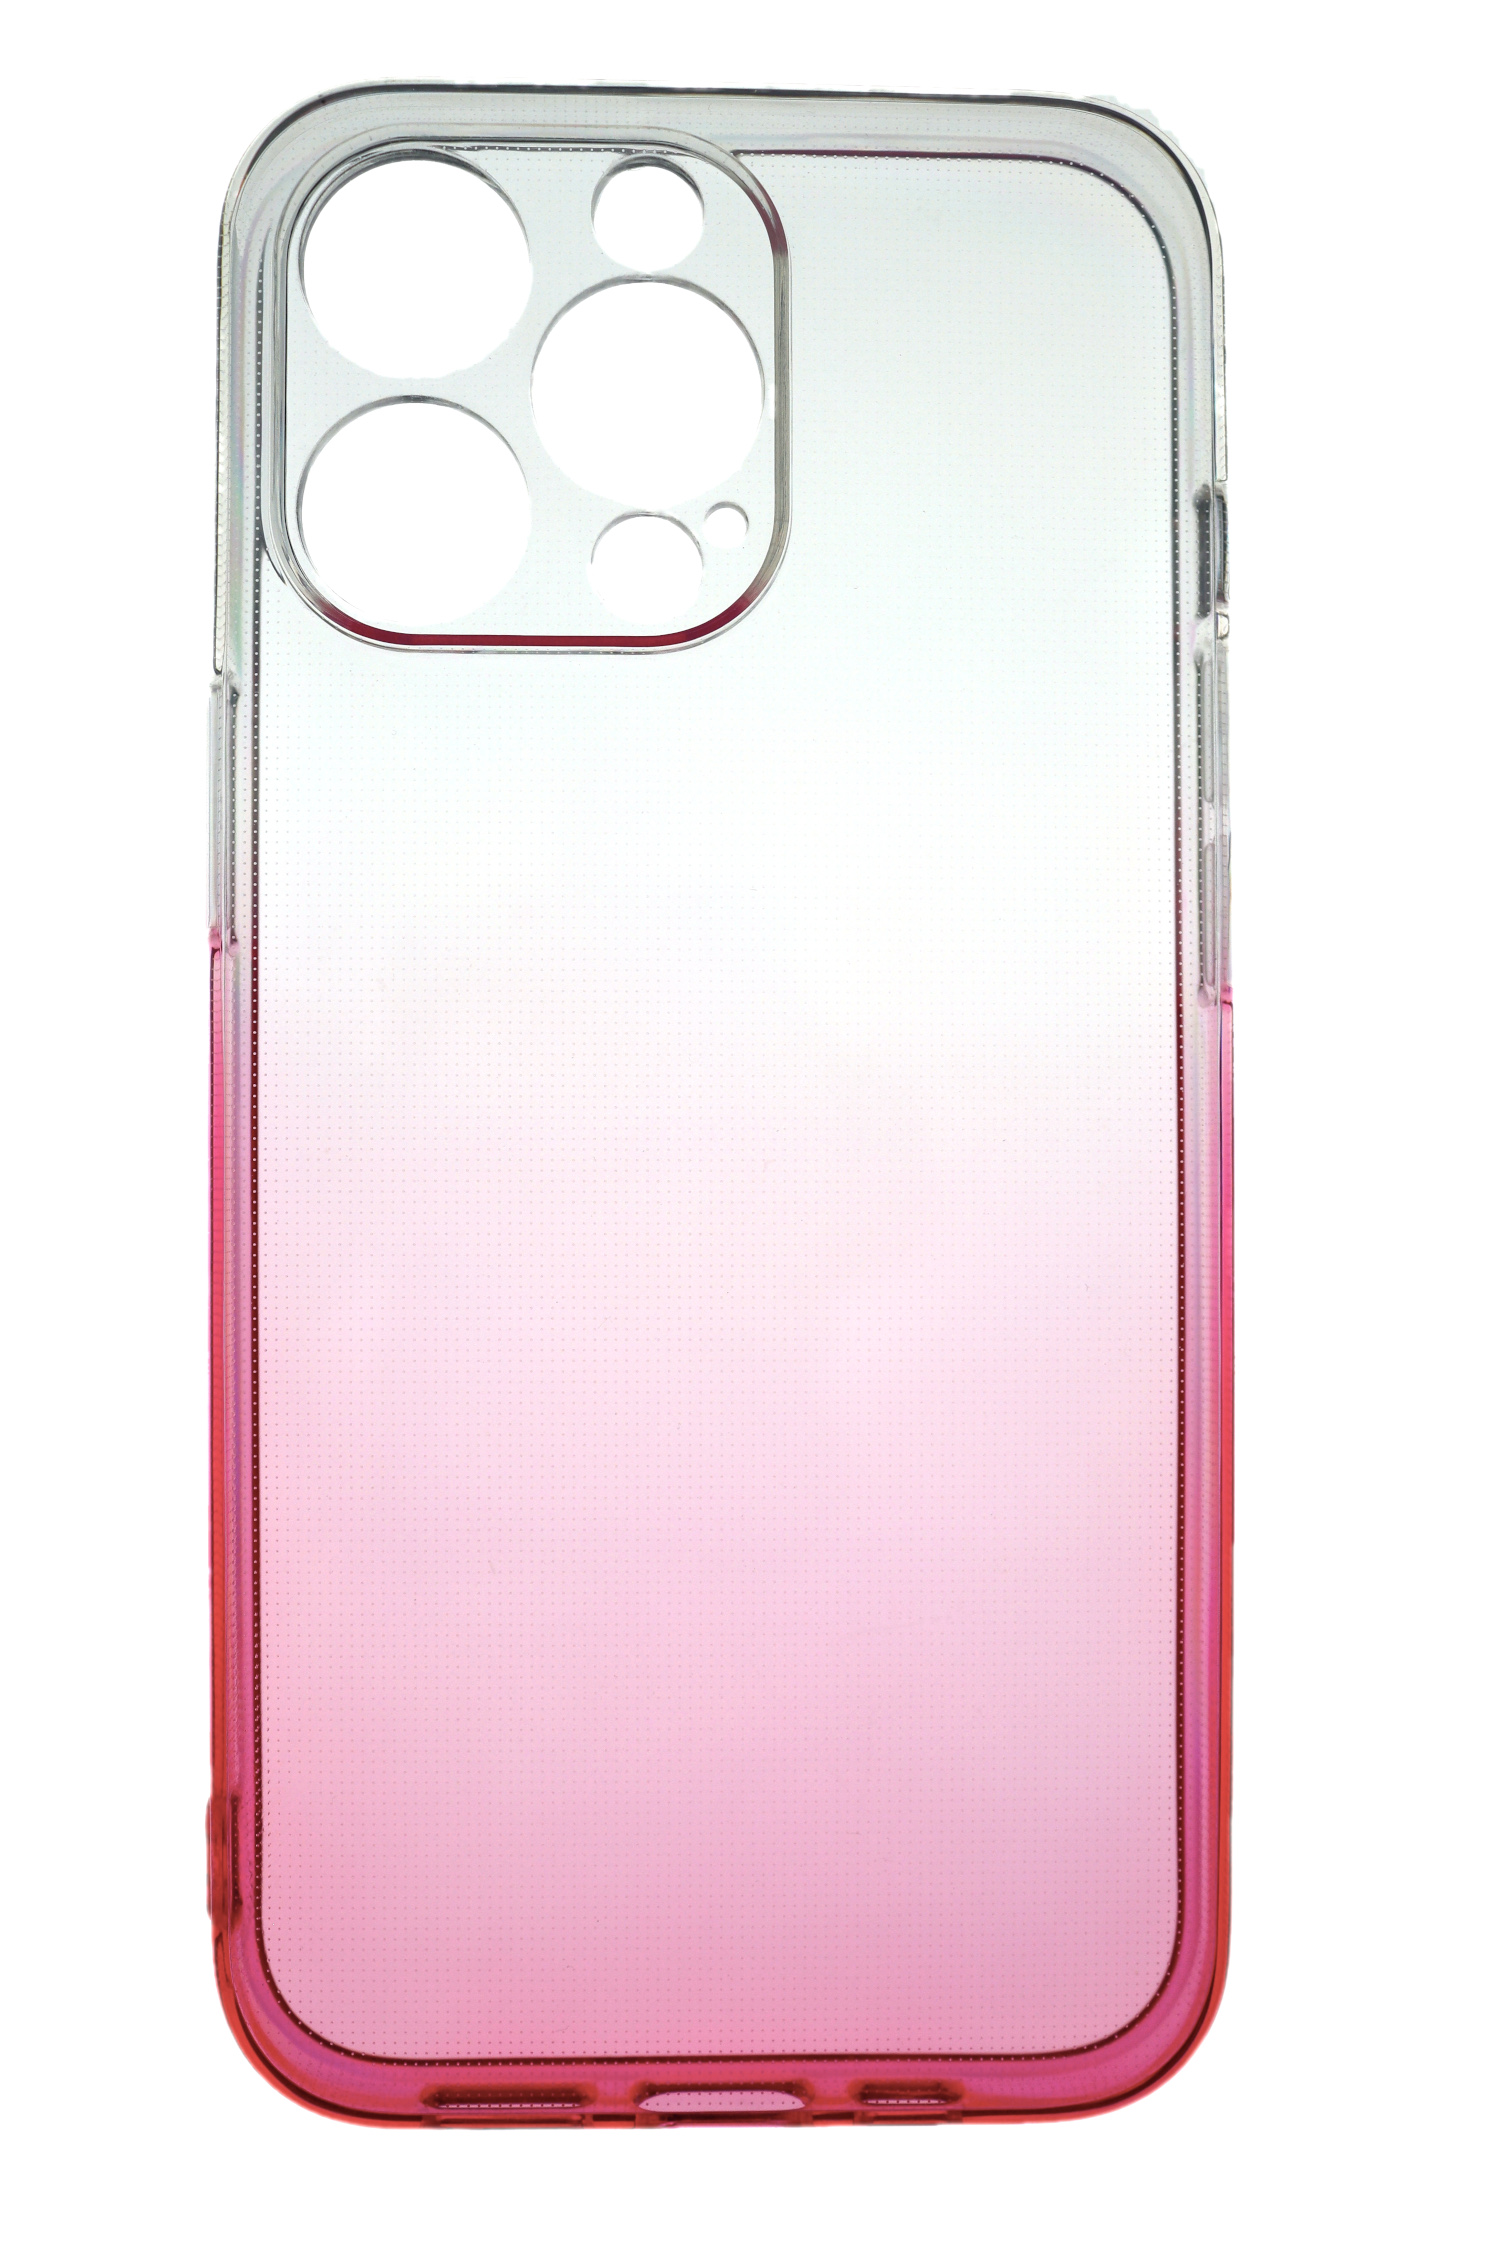 2.0 JAMCOVER mm TPU Pink, Apple, Strong, Backcover, 14 Transparent Case Pro, iPhone